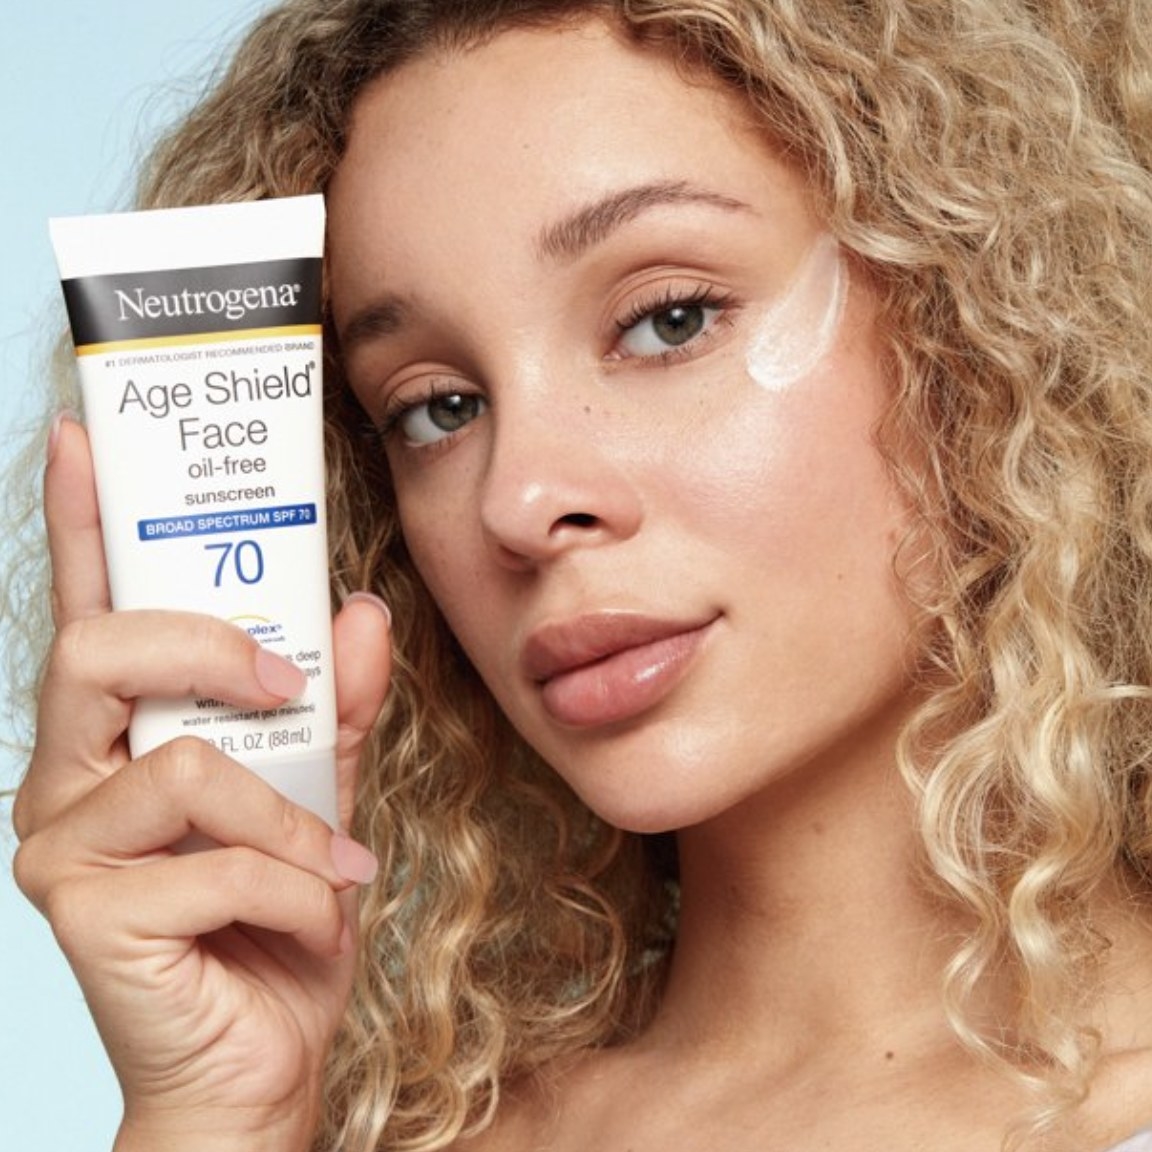 The model holds up the black, white and blue bottle that says &quot;Neutrogena Age Shield Face&quot;